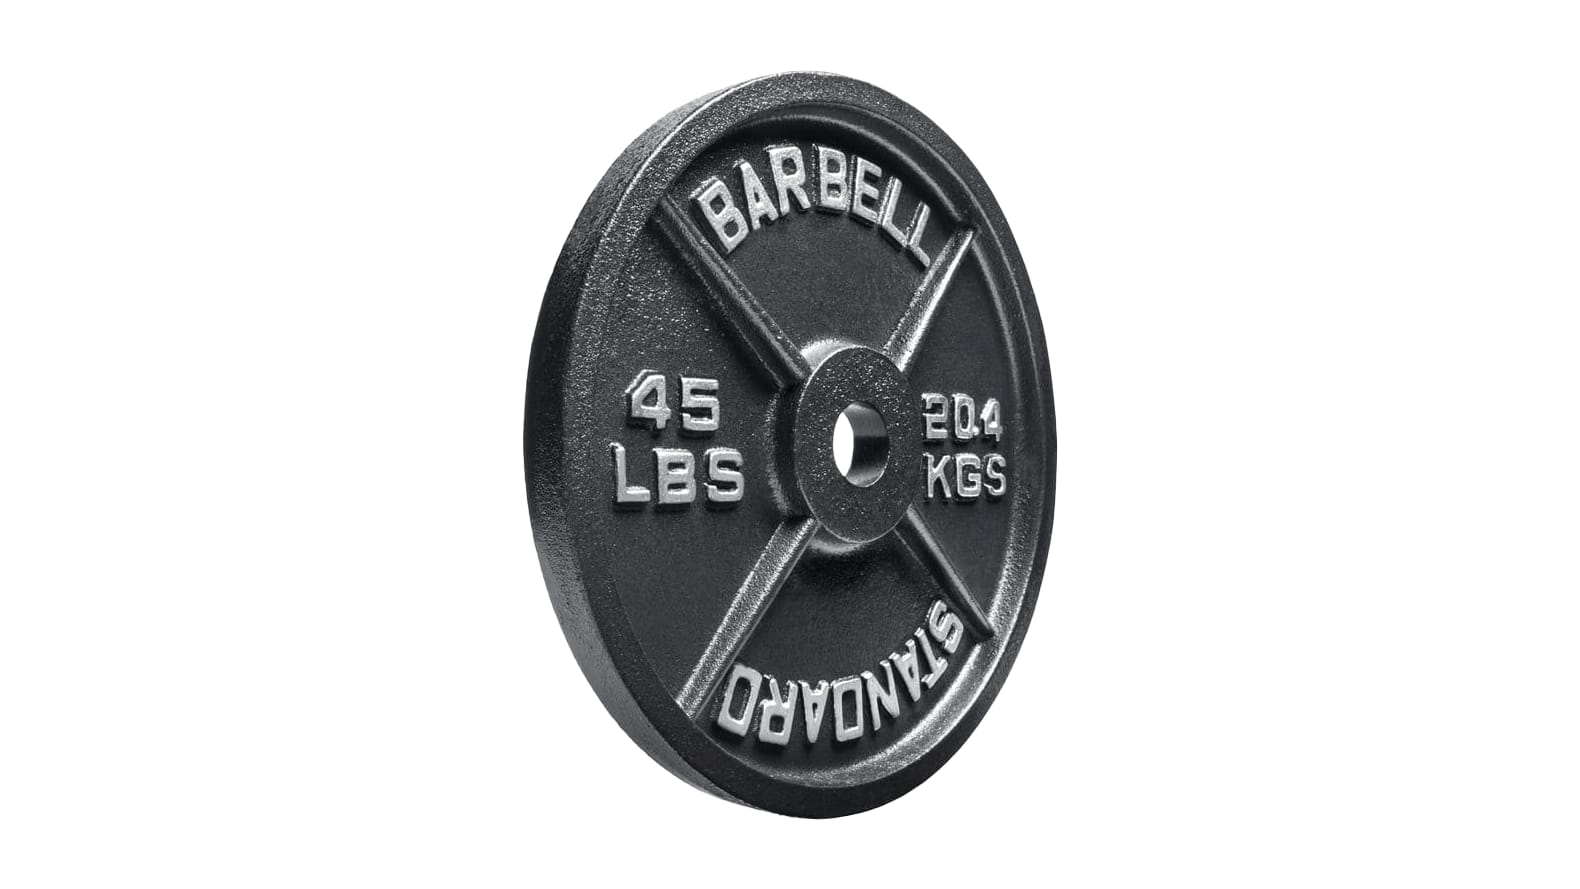 Weightlifting and Crossfit Sporzon 1-Inch or 2-Inch, Standard or Olympic Cast Iron Plate Weight Plate for Strength Training 